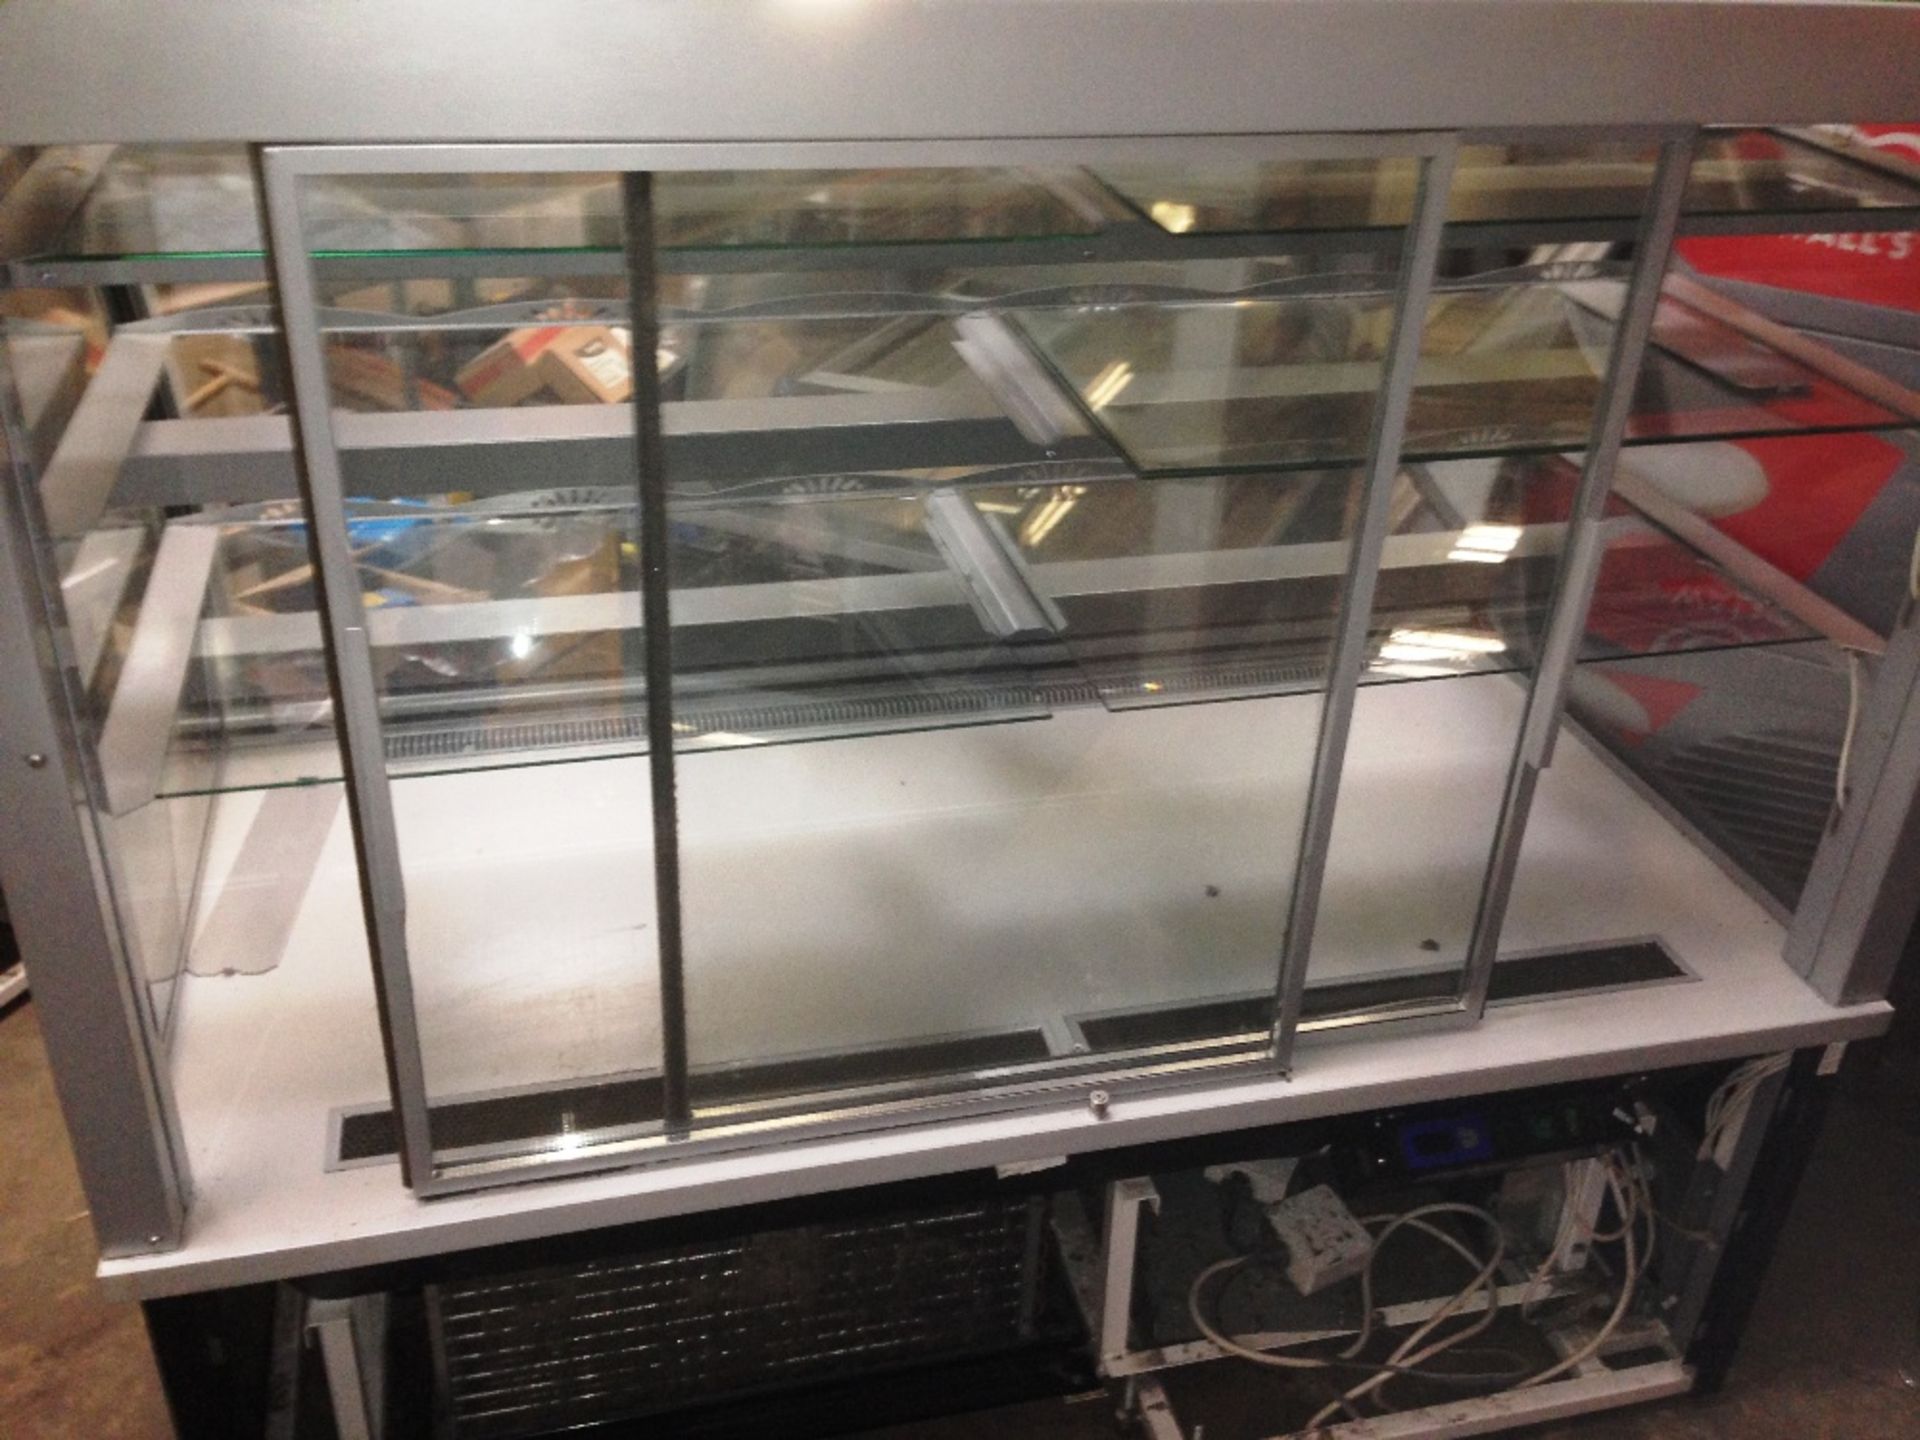 Nuttall 144cm Refrigerated serve over display counter - internal glass shelves and light - Image 3 of 3